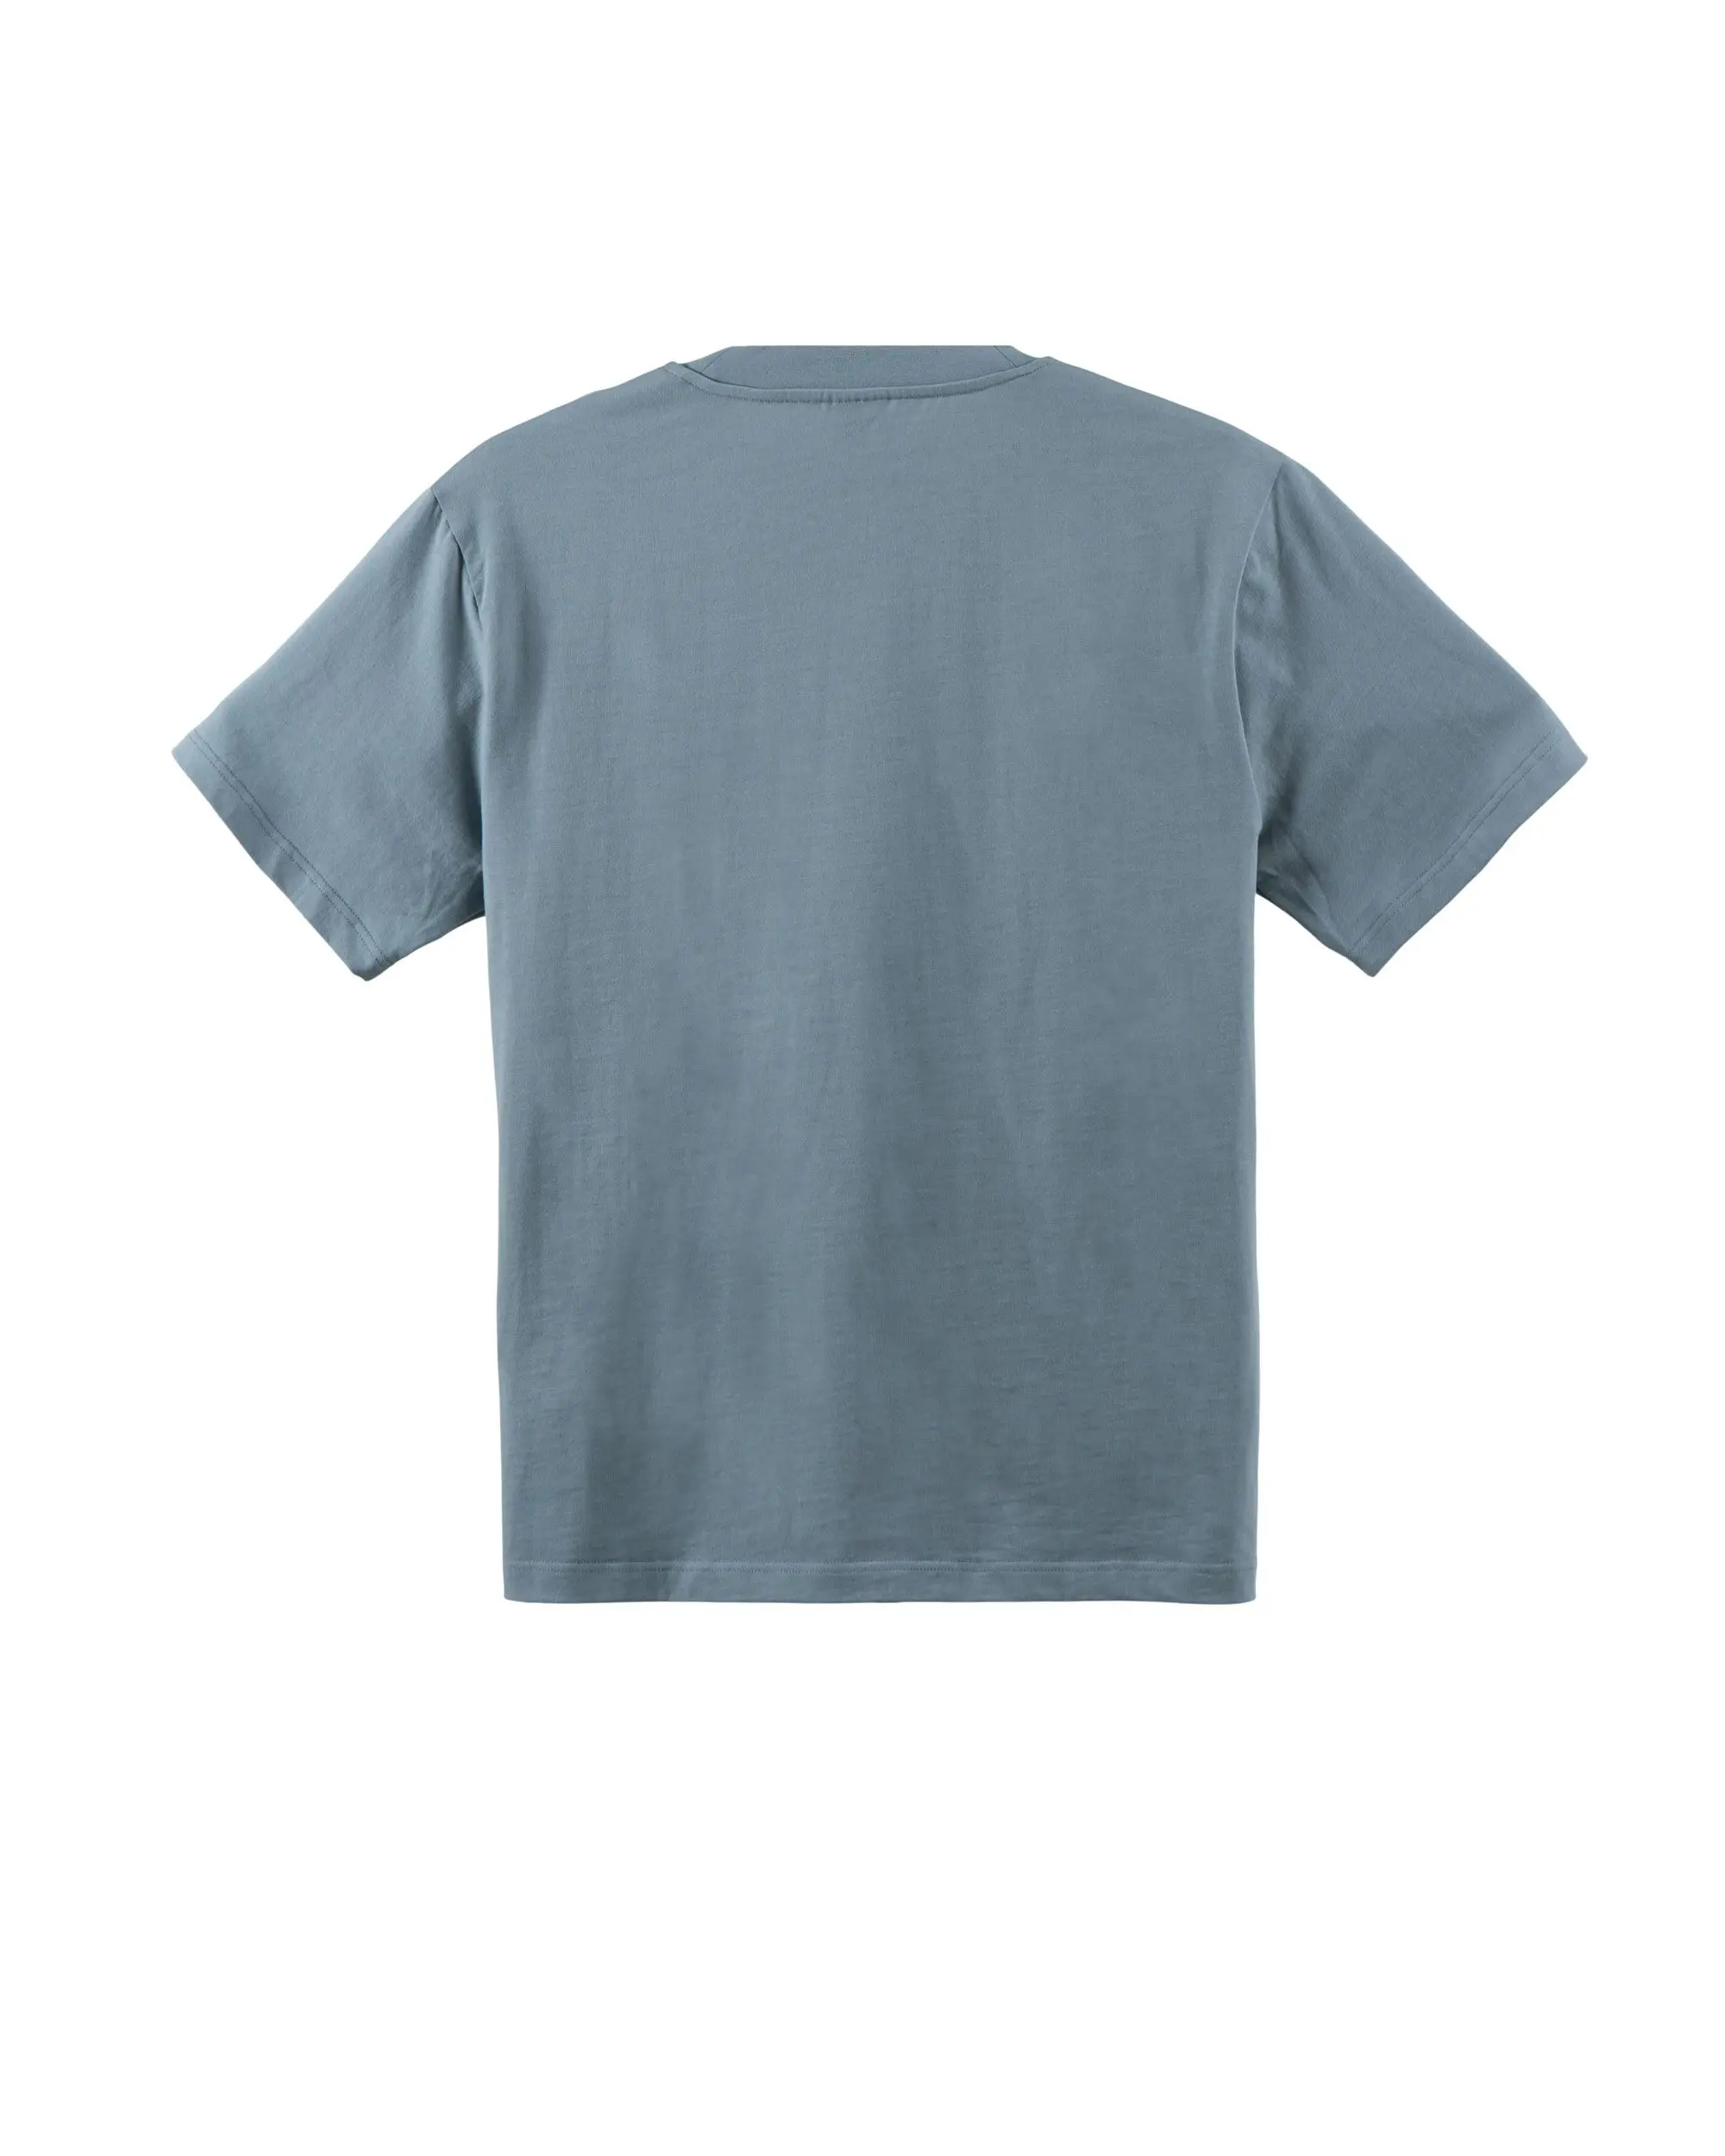 Cotton On Heavy Weight Pocket T-Shirt 2024, Buy Cotton On Online